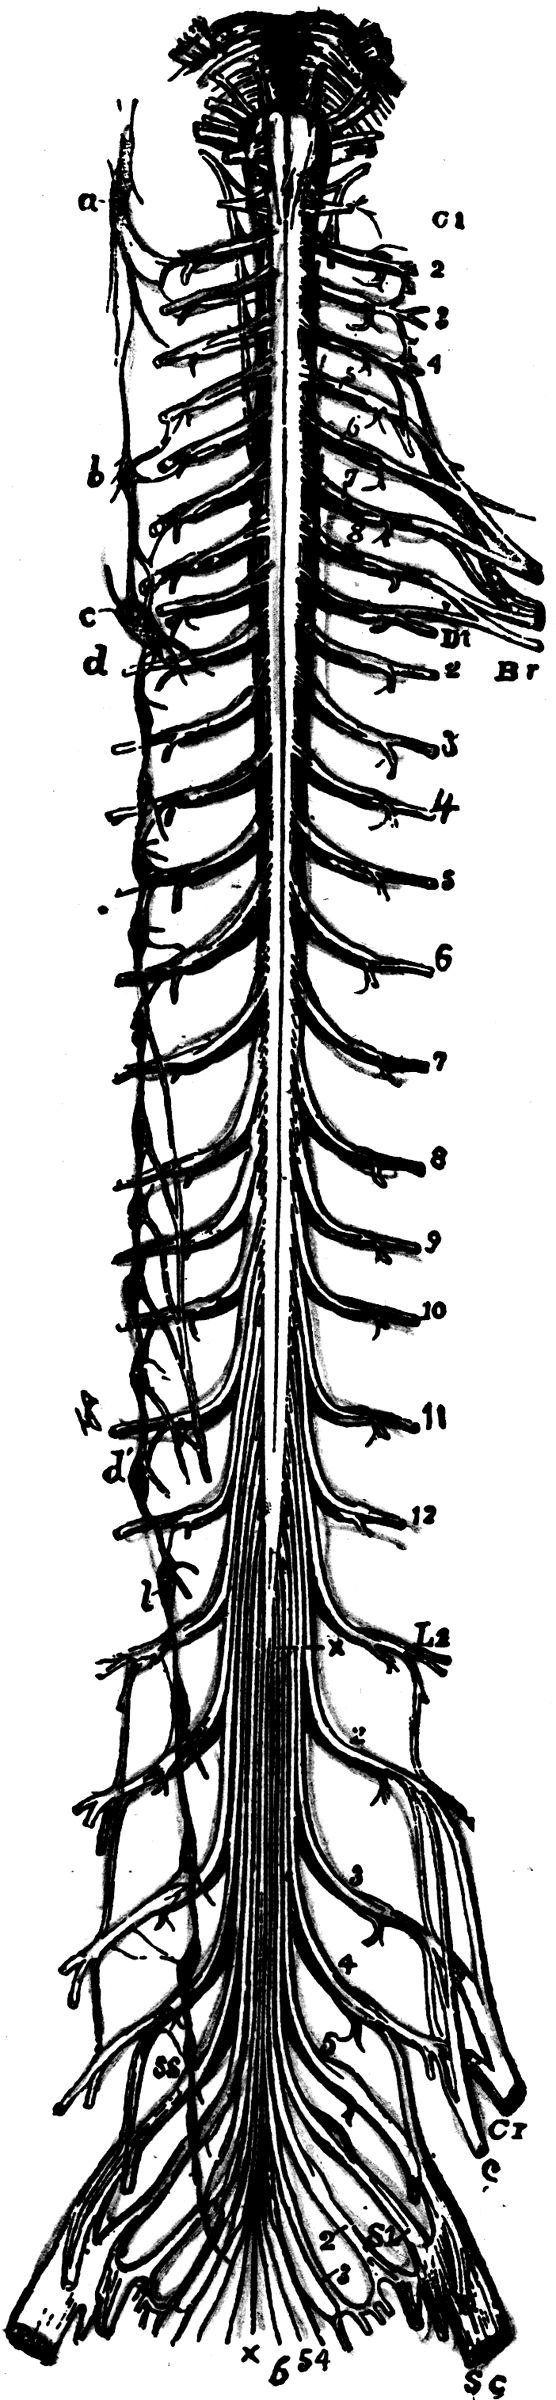 Spinal Cord | ClipArt ETC